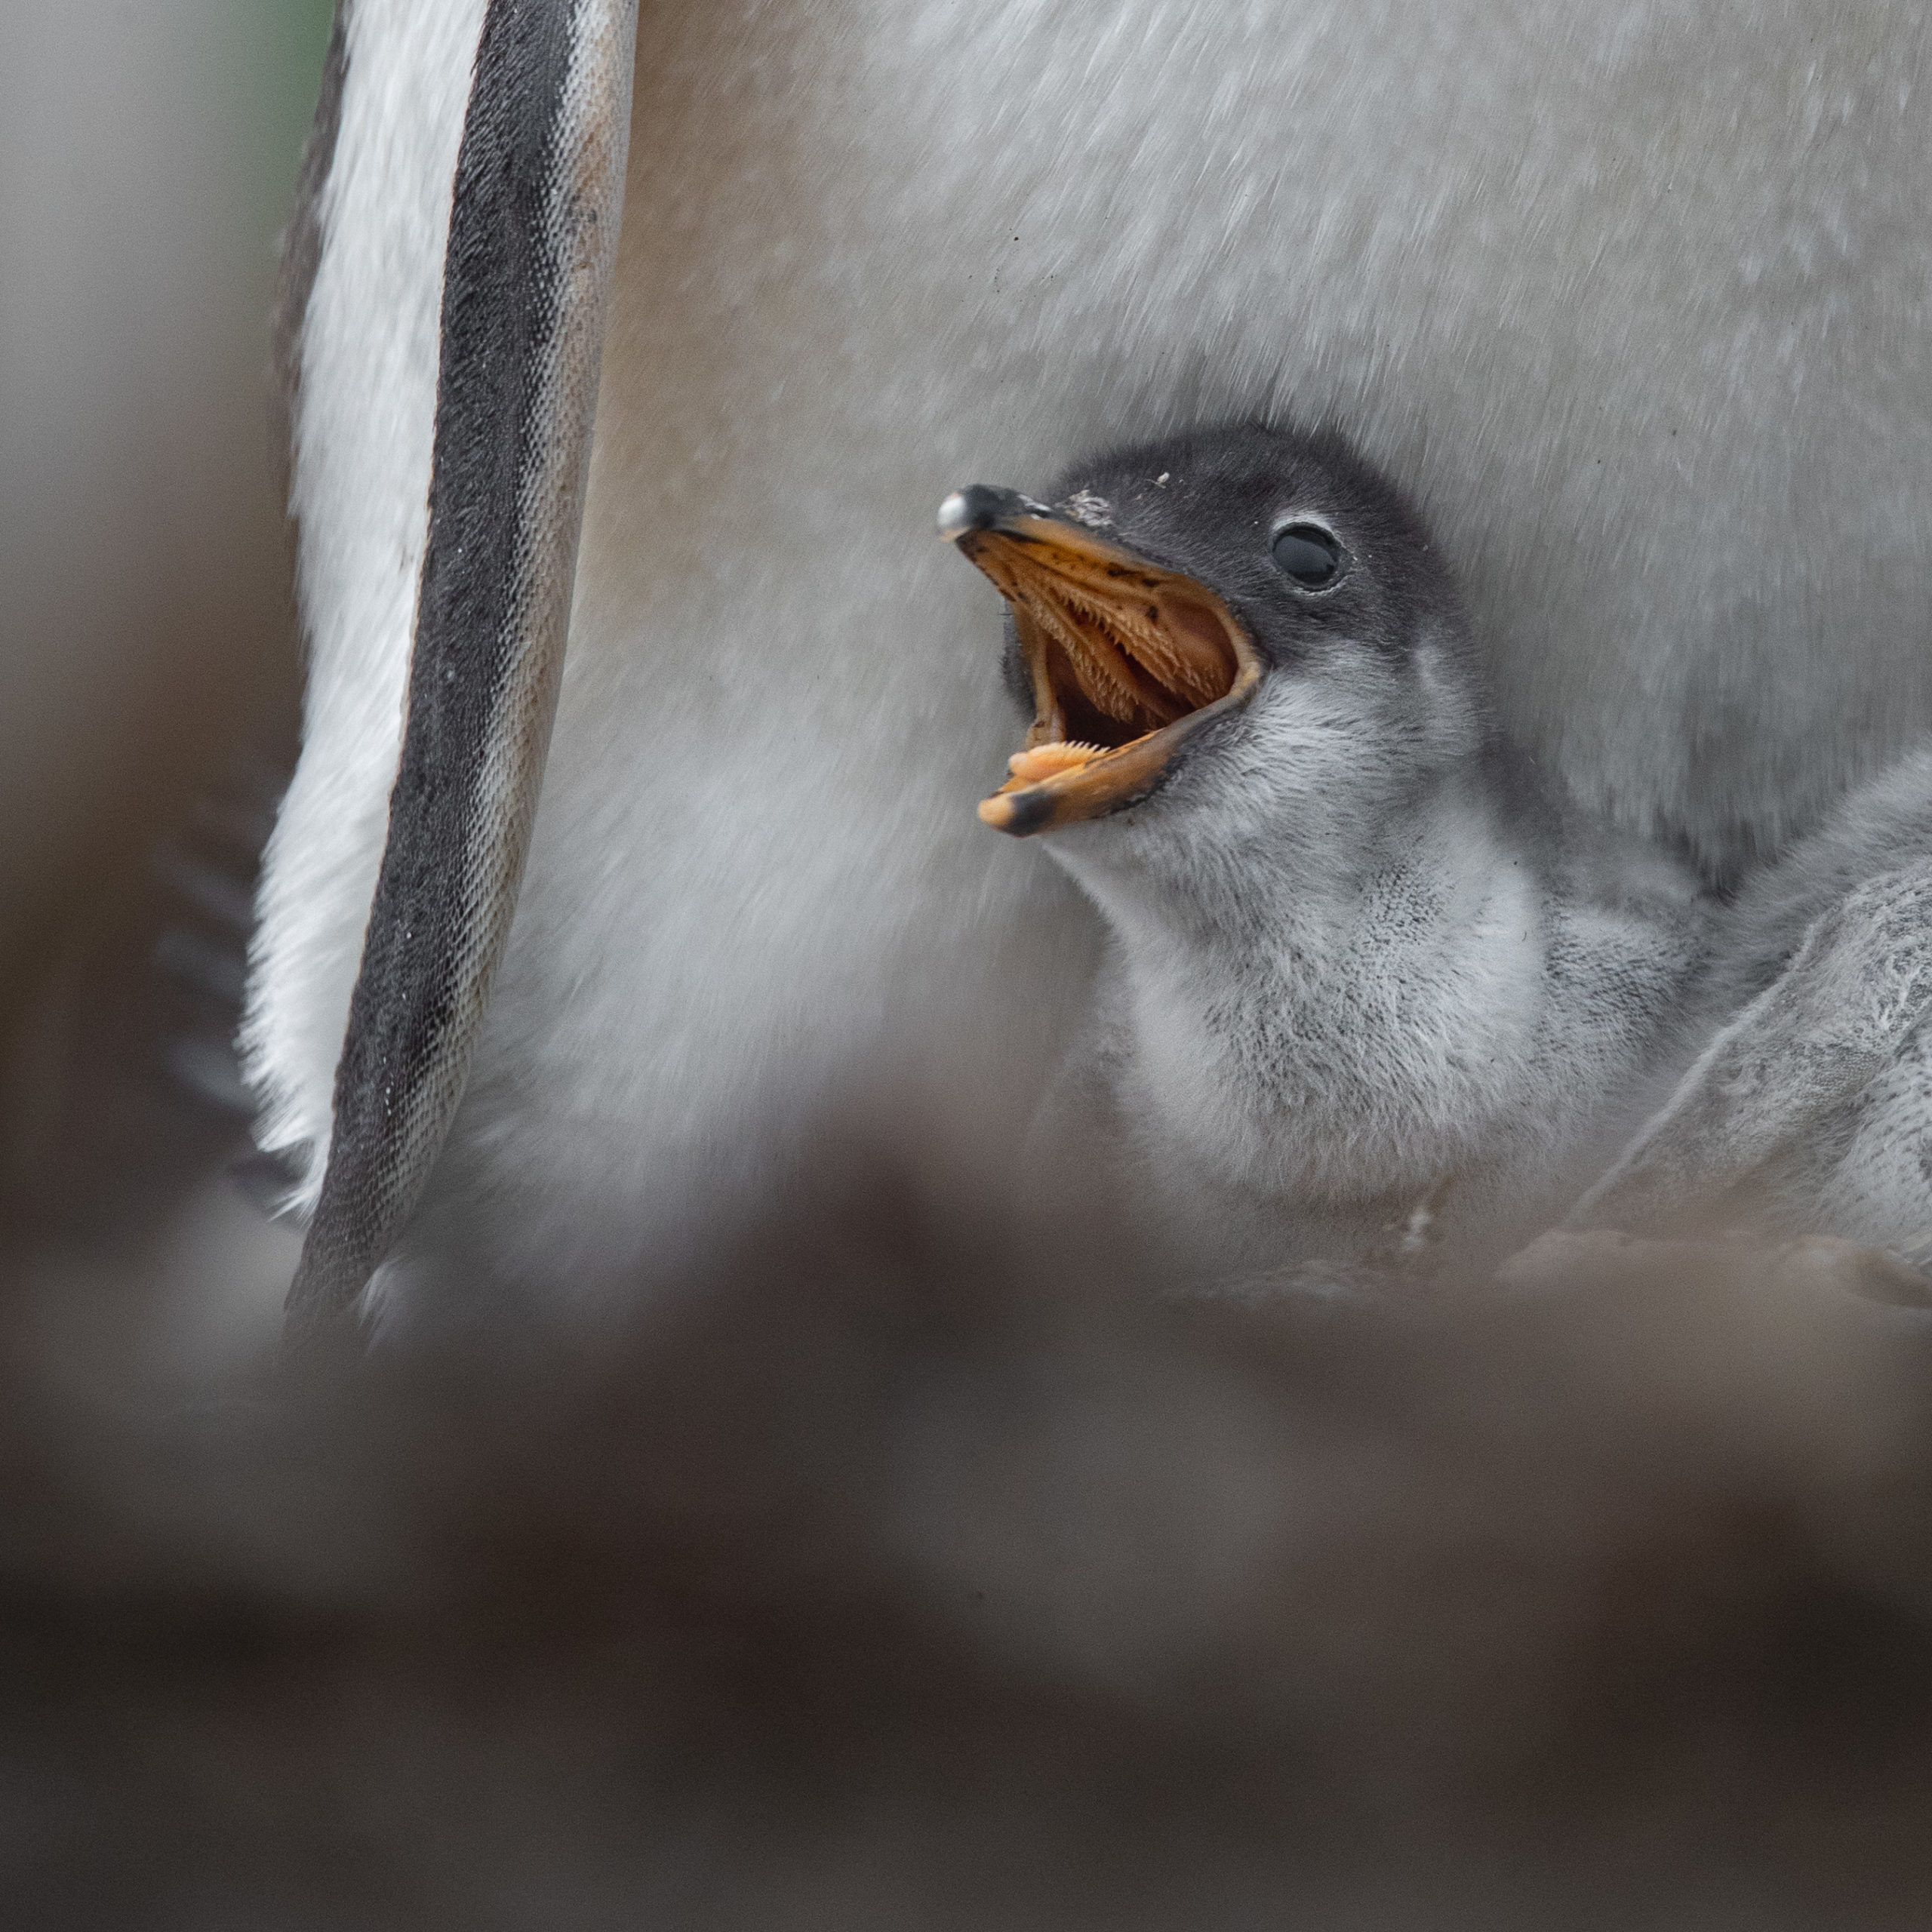 Wildlife photography of a newborn gentoo penguin chick at its nest on the Falkland Islands